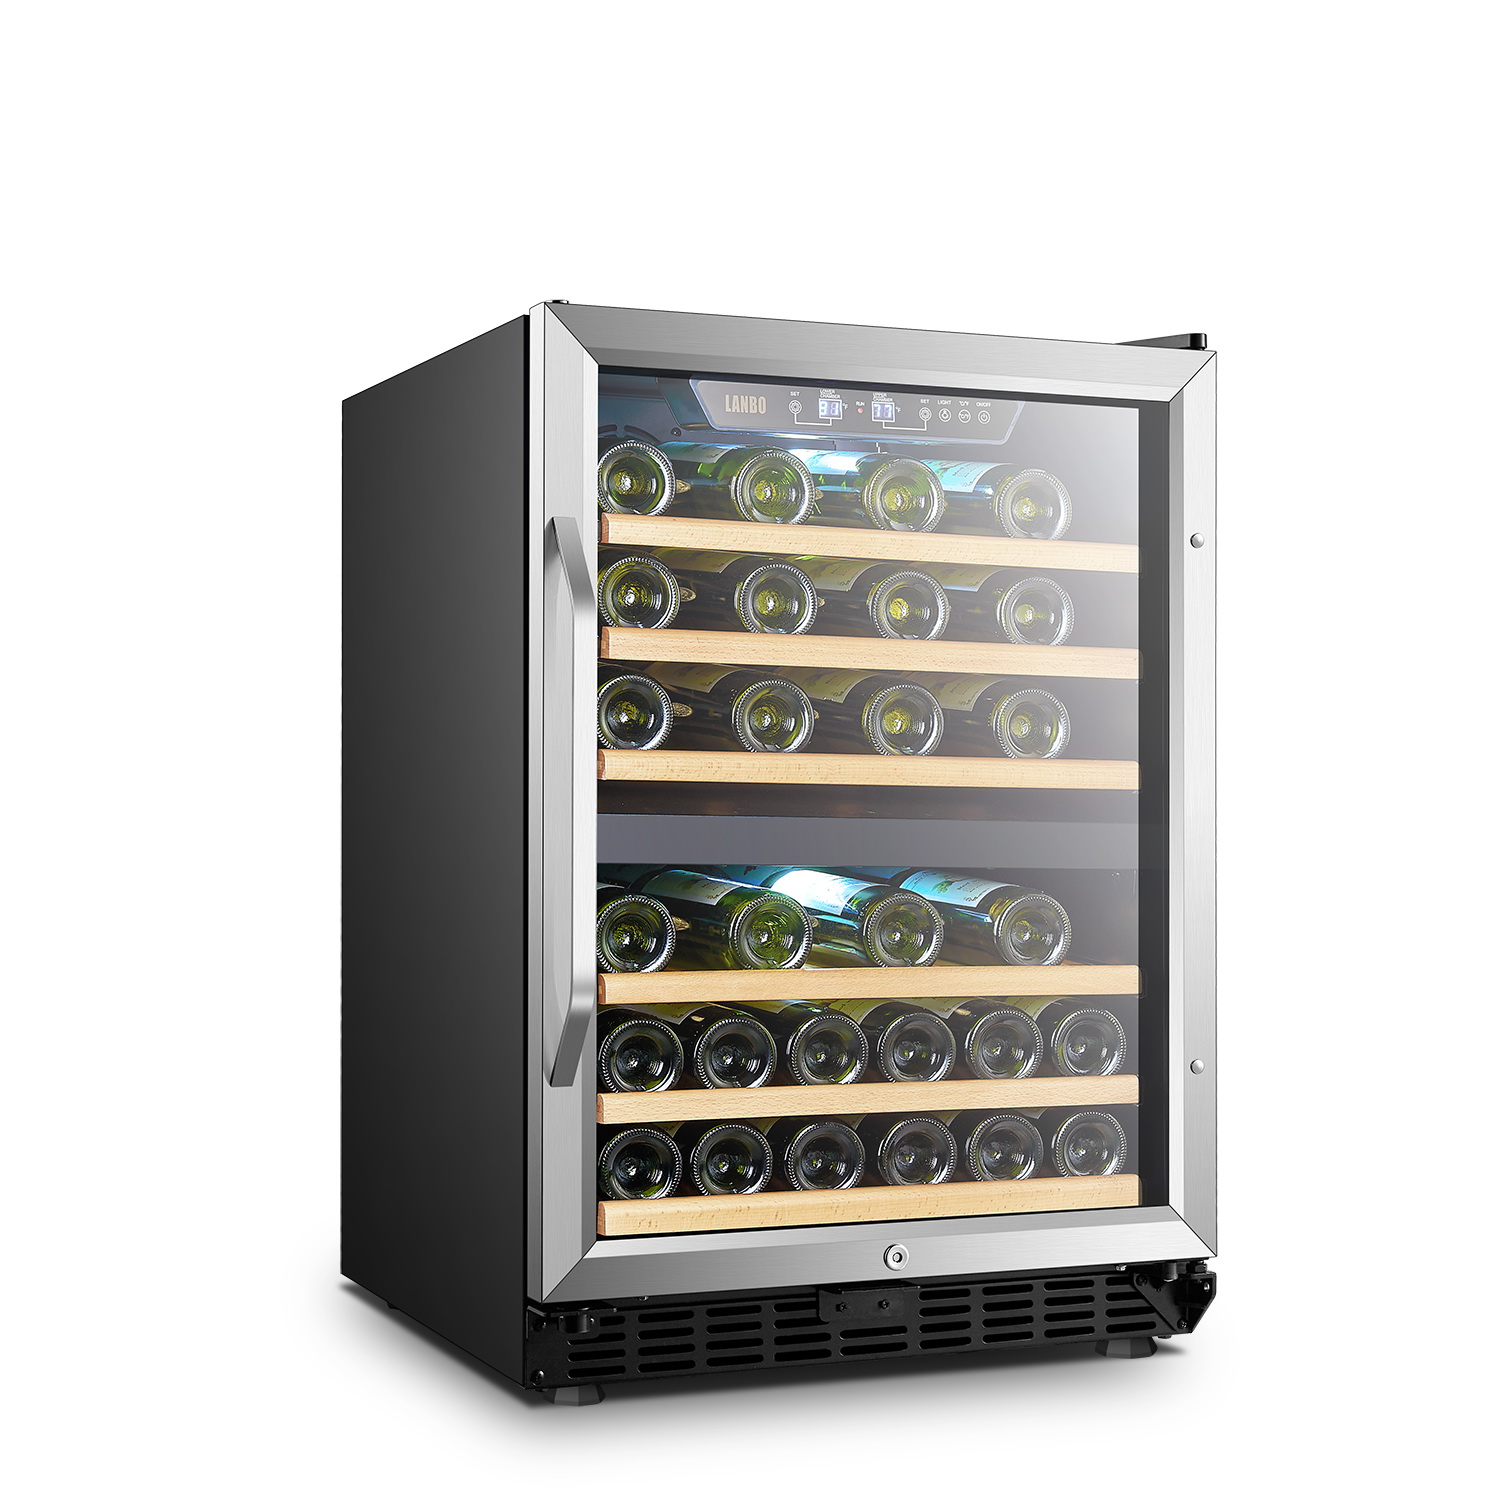 Lanbo Dual Zone Wine Refrigerator, 44 Bottle Built-in Compressor Wine Cooler, Black Cabinet with Stainless Steel Trim